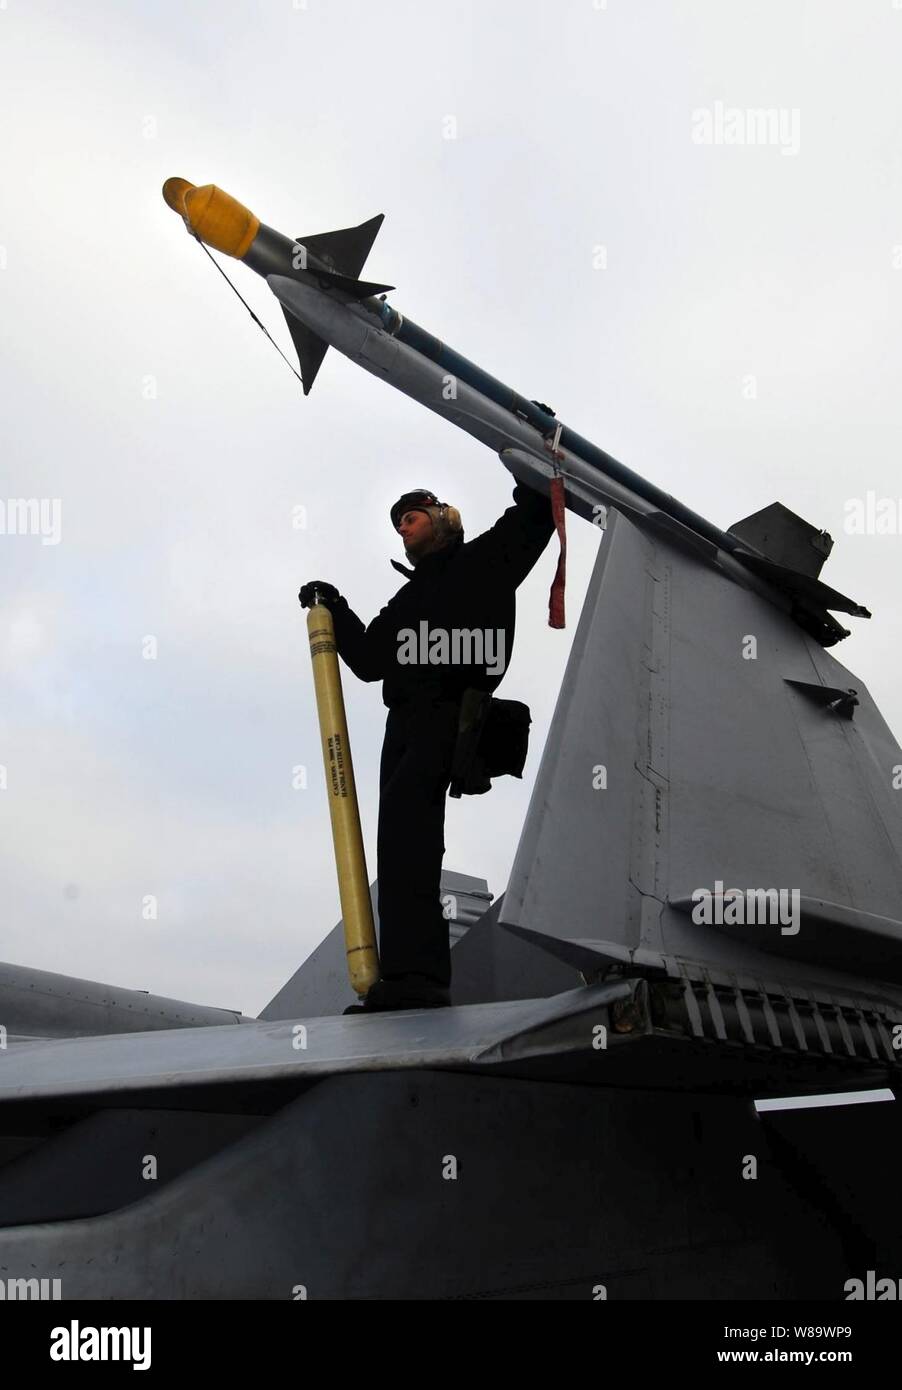 U.S. Navy Aviation Ordnanceman 3rd Class Ruben Alfonso stands on the wing of an F/A-18C Hornet aircraft before conducting a final check on an AIM-9 Sidewinder air-to-air missile on the flight deck aboard the Nimitz-class aircraft carrier USS John C. Stennis (CVN 74) while underway in the Pacific Ocean on June 13, 2008.  The Stennis and Carrier Air Wing 9 are conducting tailored ship's training availability off the coast of Southern California. Stock Photo